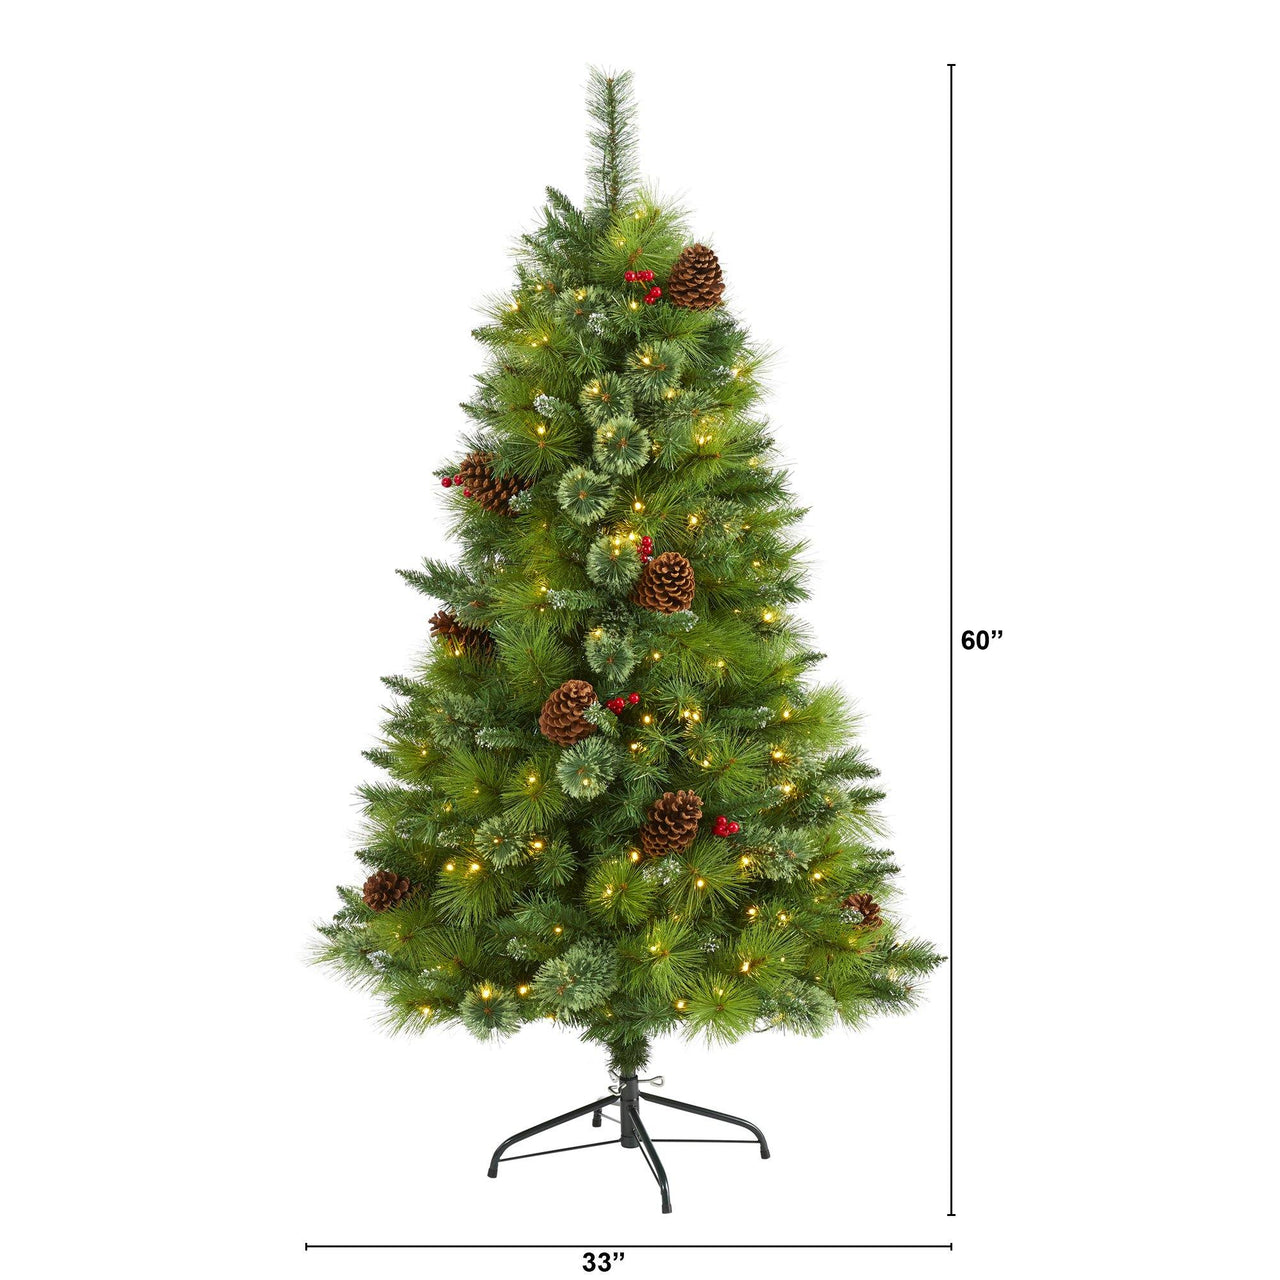 5’ Montana Mixed Pine Artificial Christmas Tree with Pine Cones, Berries and 250 Clear LED Lights - The Fox Decor